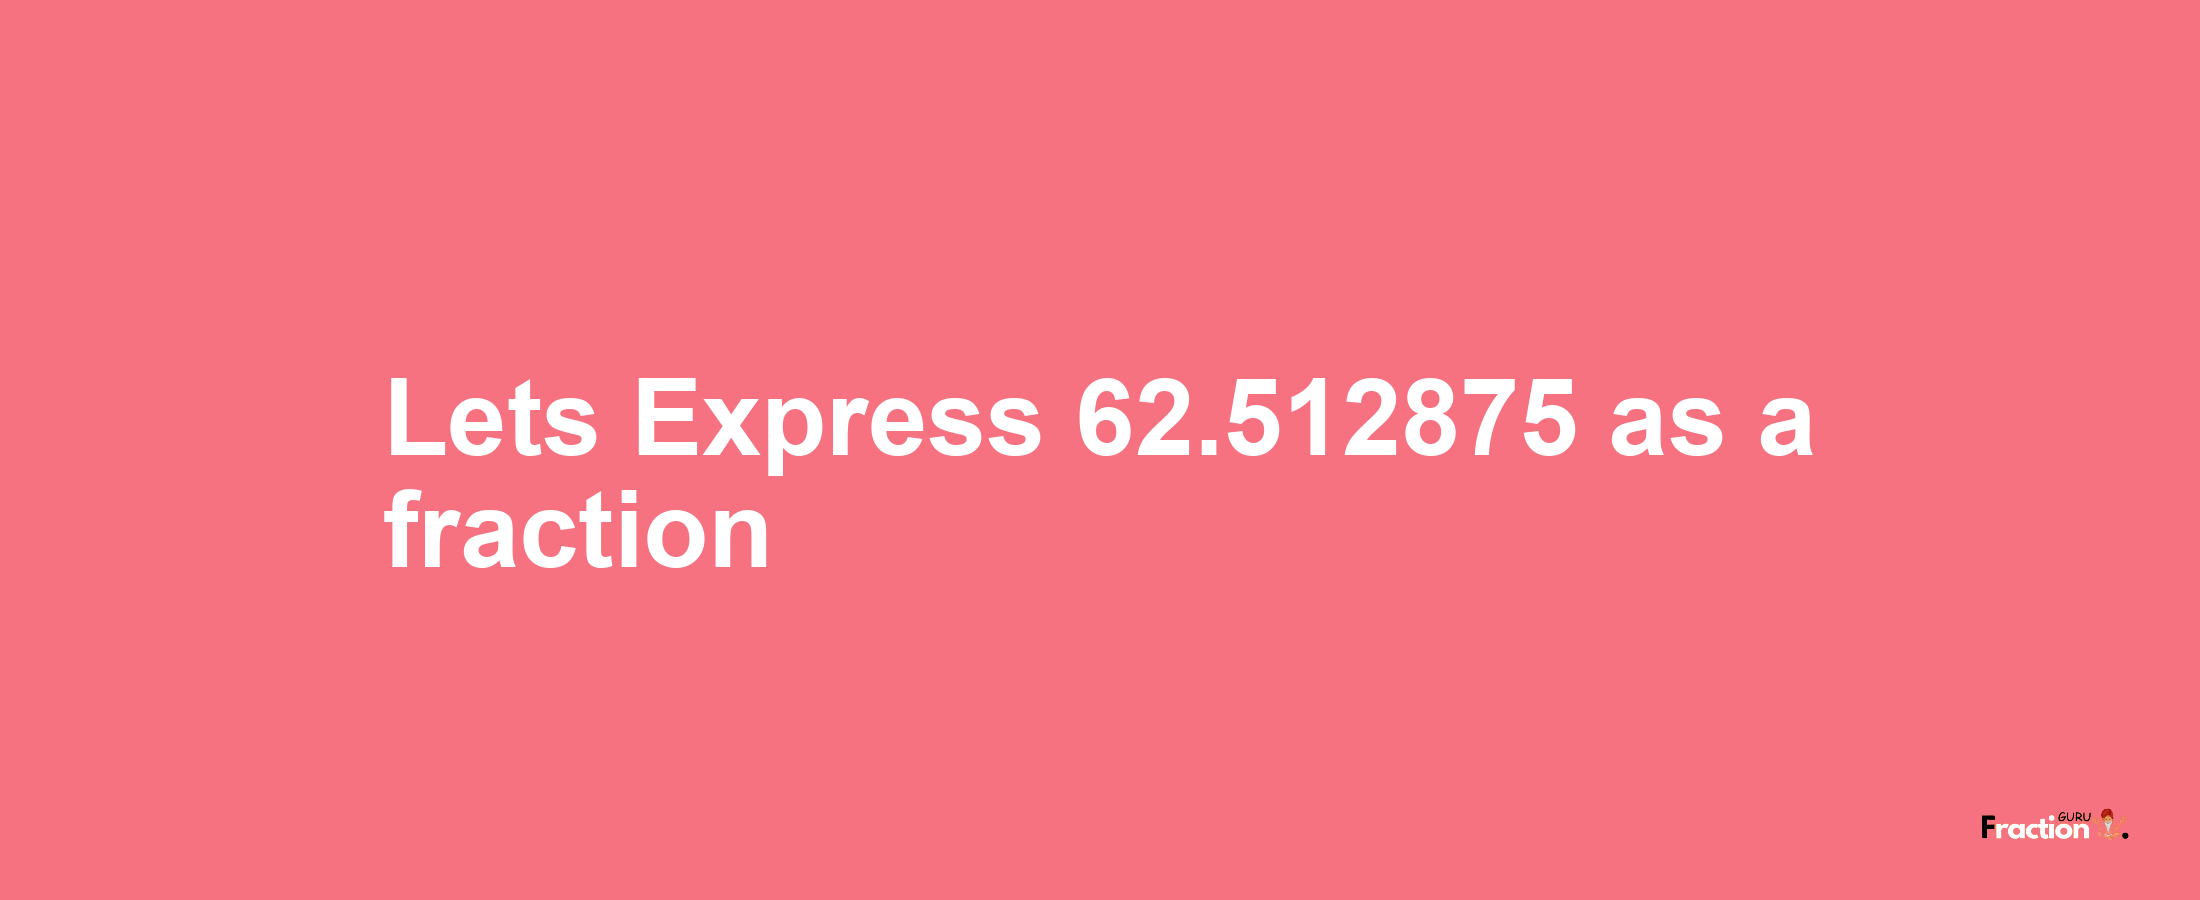 Lets Express 62.512875 as afraction